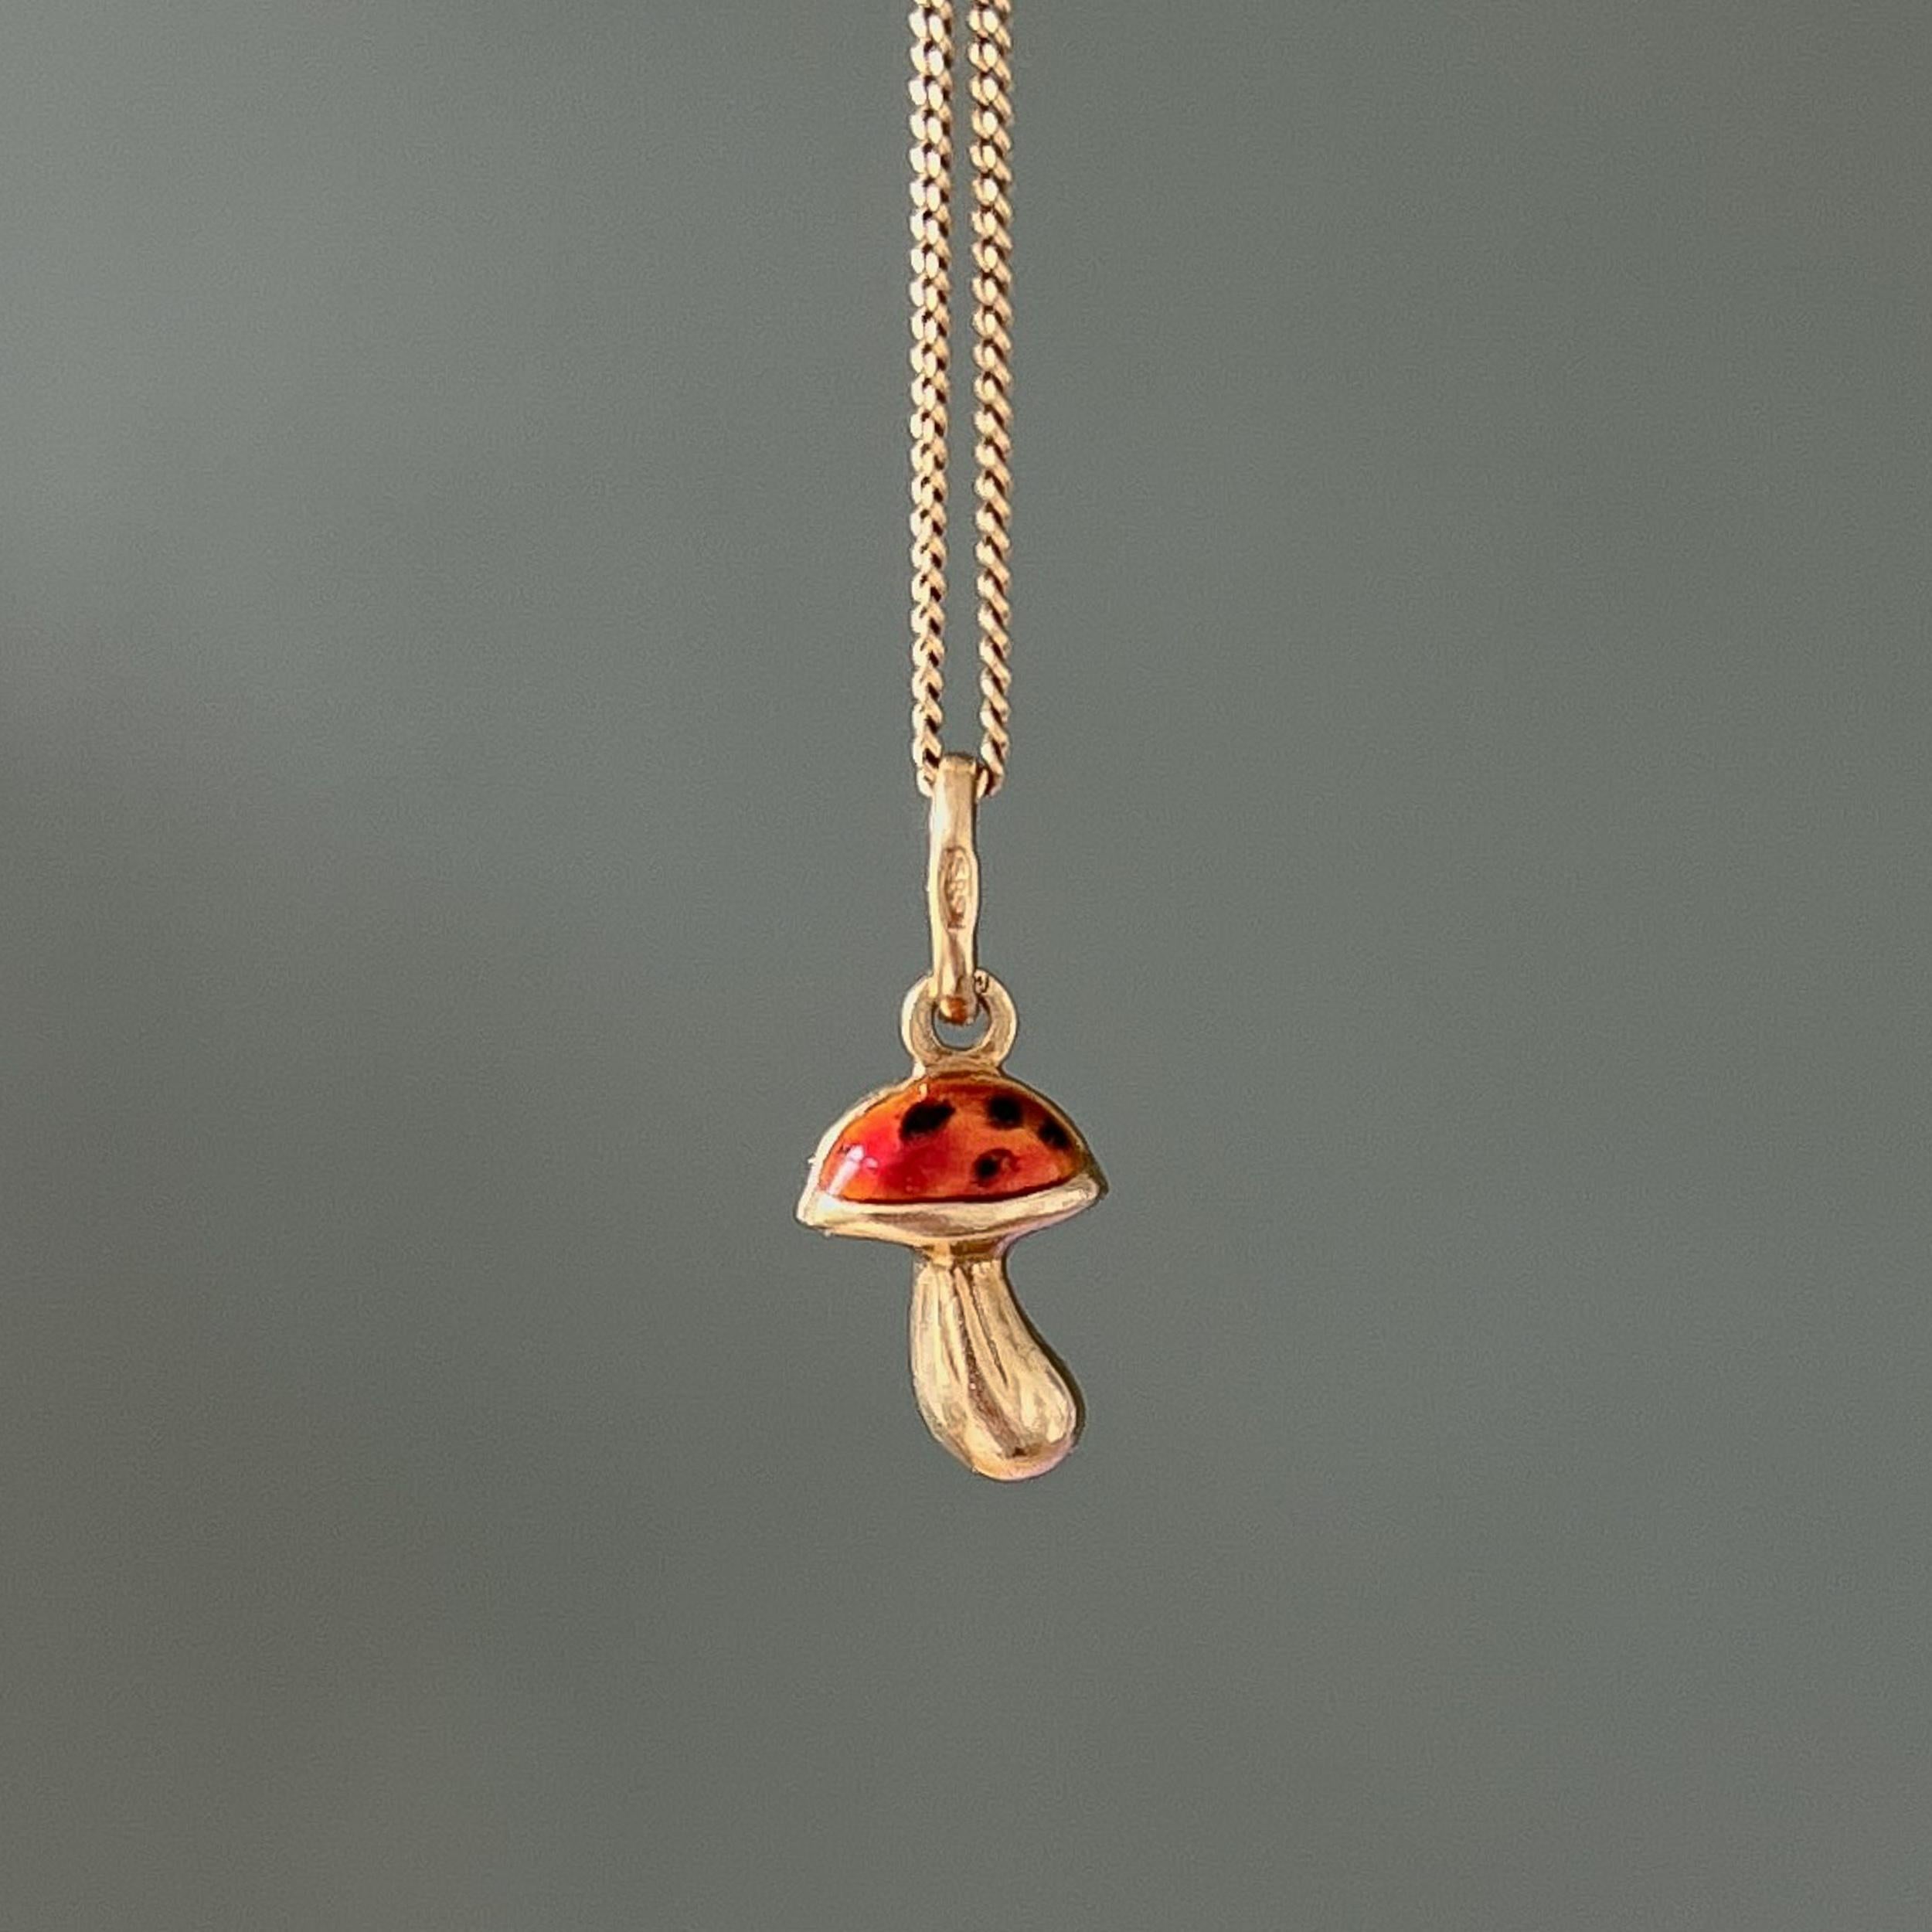 A lovely vintage colorful toadstool charm created with red enamel and black dots on both sides. This three-dimensional toadstool is crafted in 14 karat gold and a great addition to any charm bracelet or necklace. Autumn is just around the